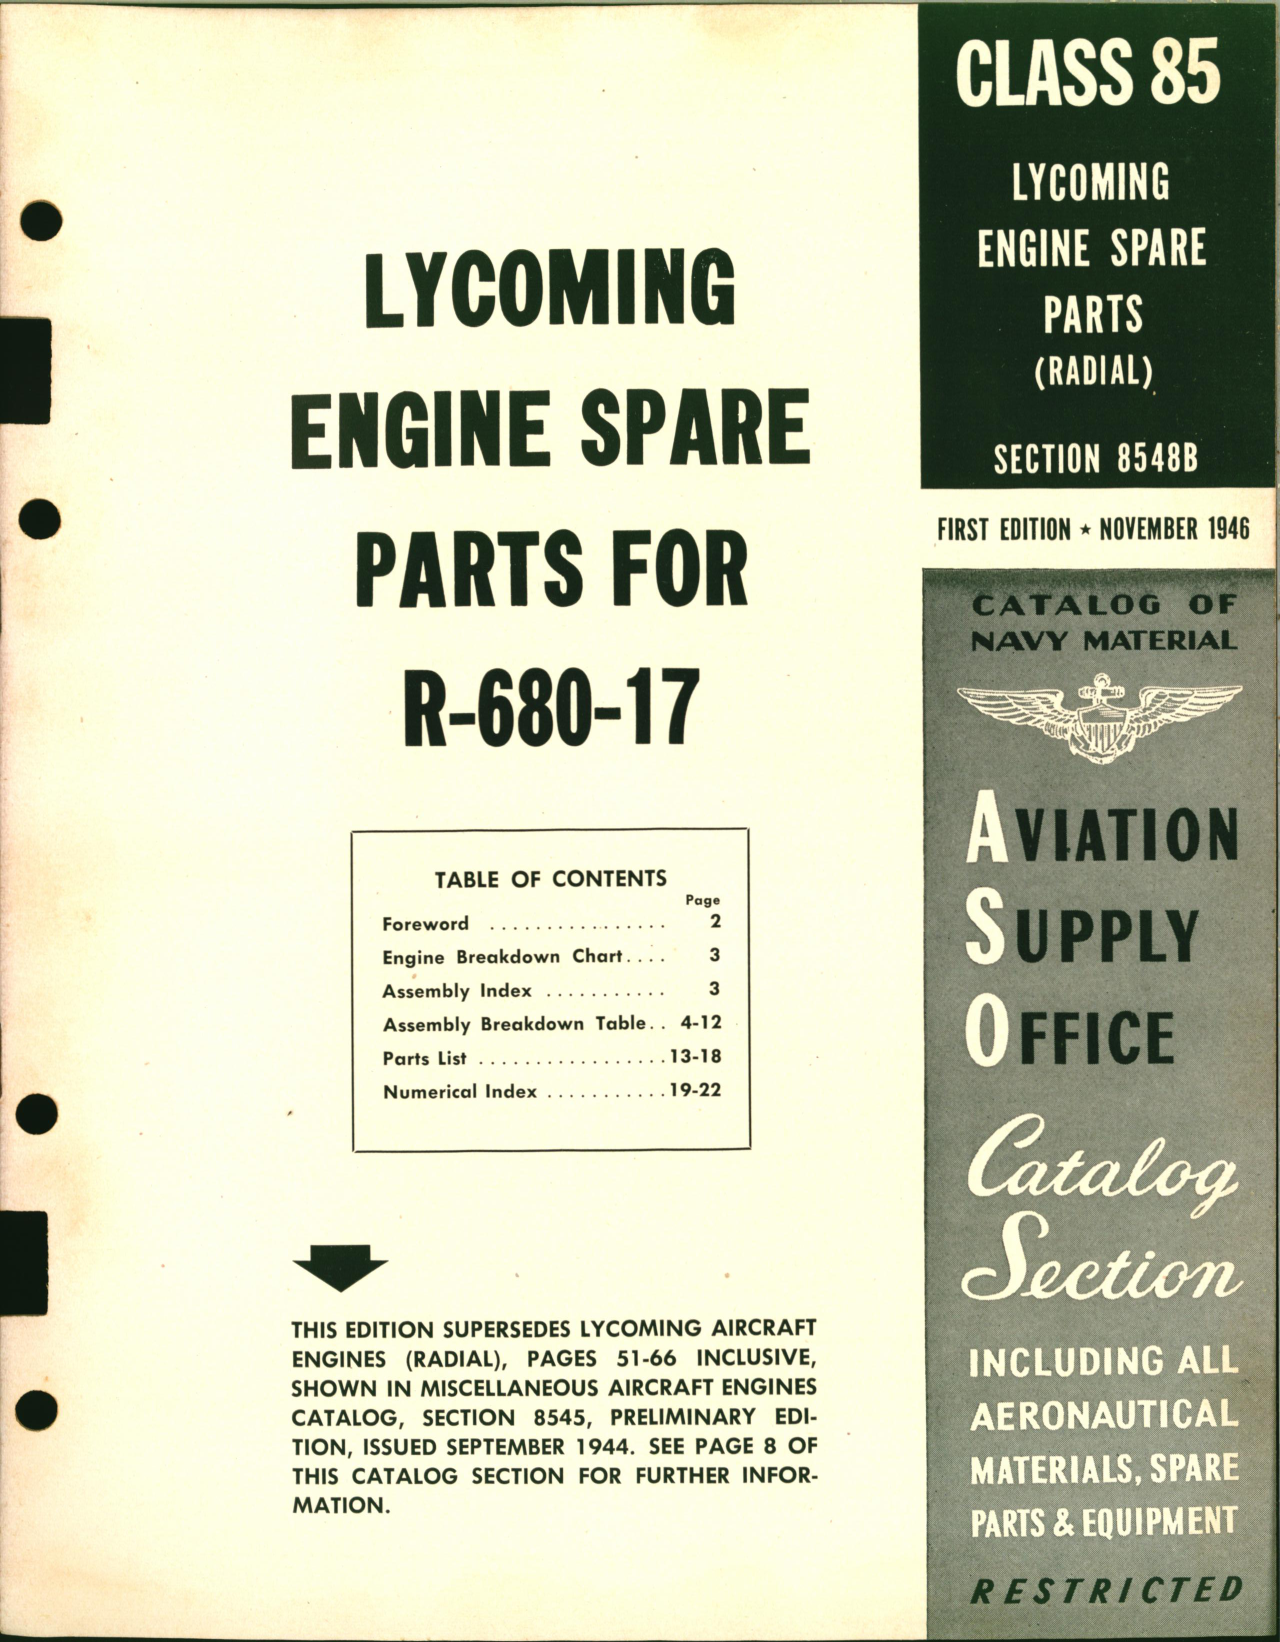 Sample page 1 from AirCorps Library document: Lycoming Engine Spare Parts for R-680-17  (Radial)